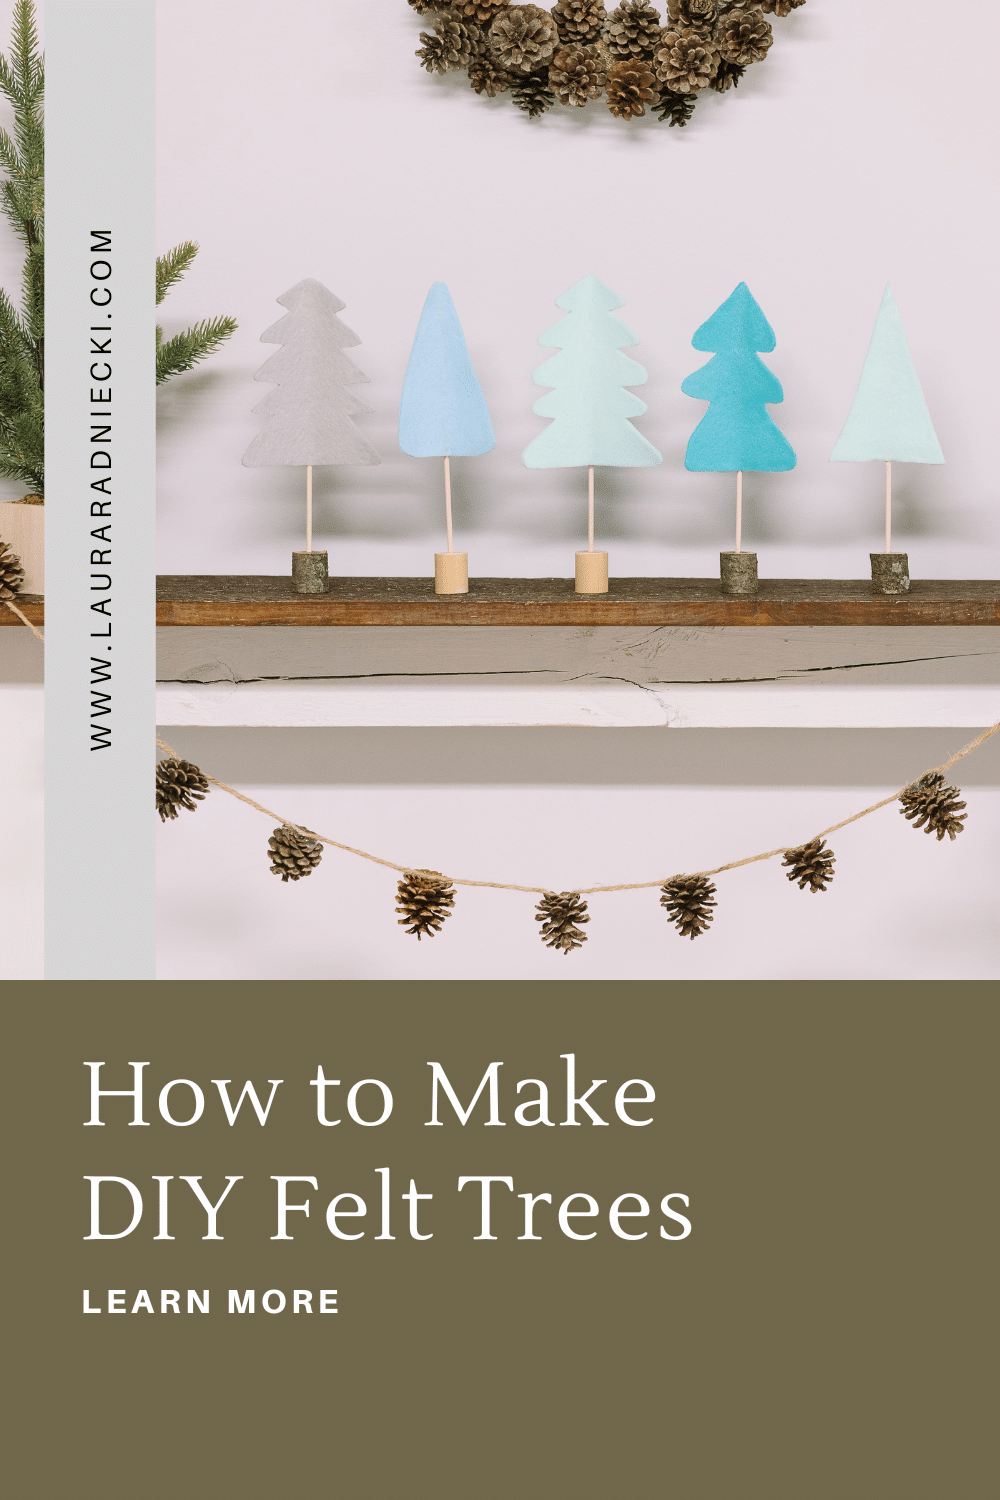 How to Make Felt Trees for the Holidays